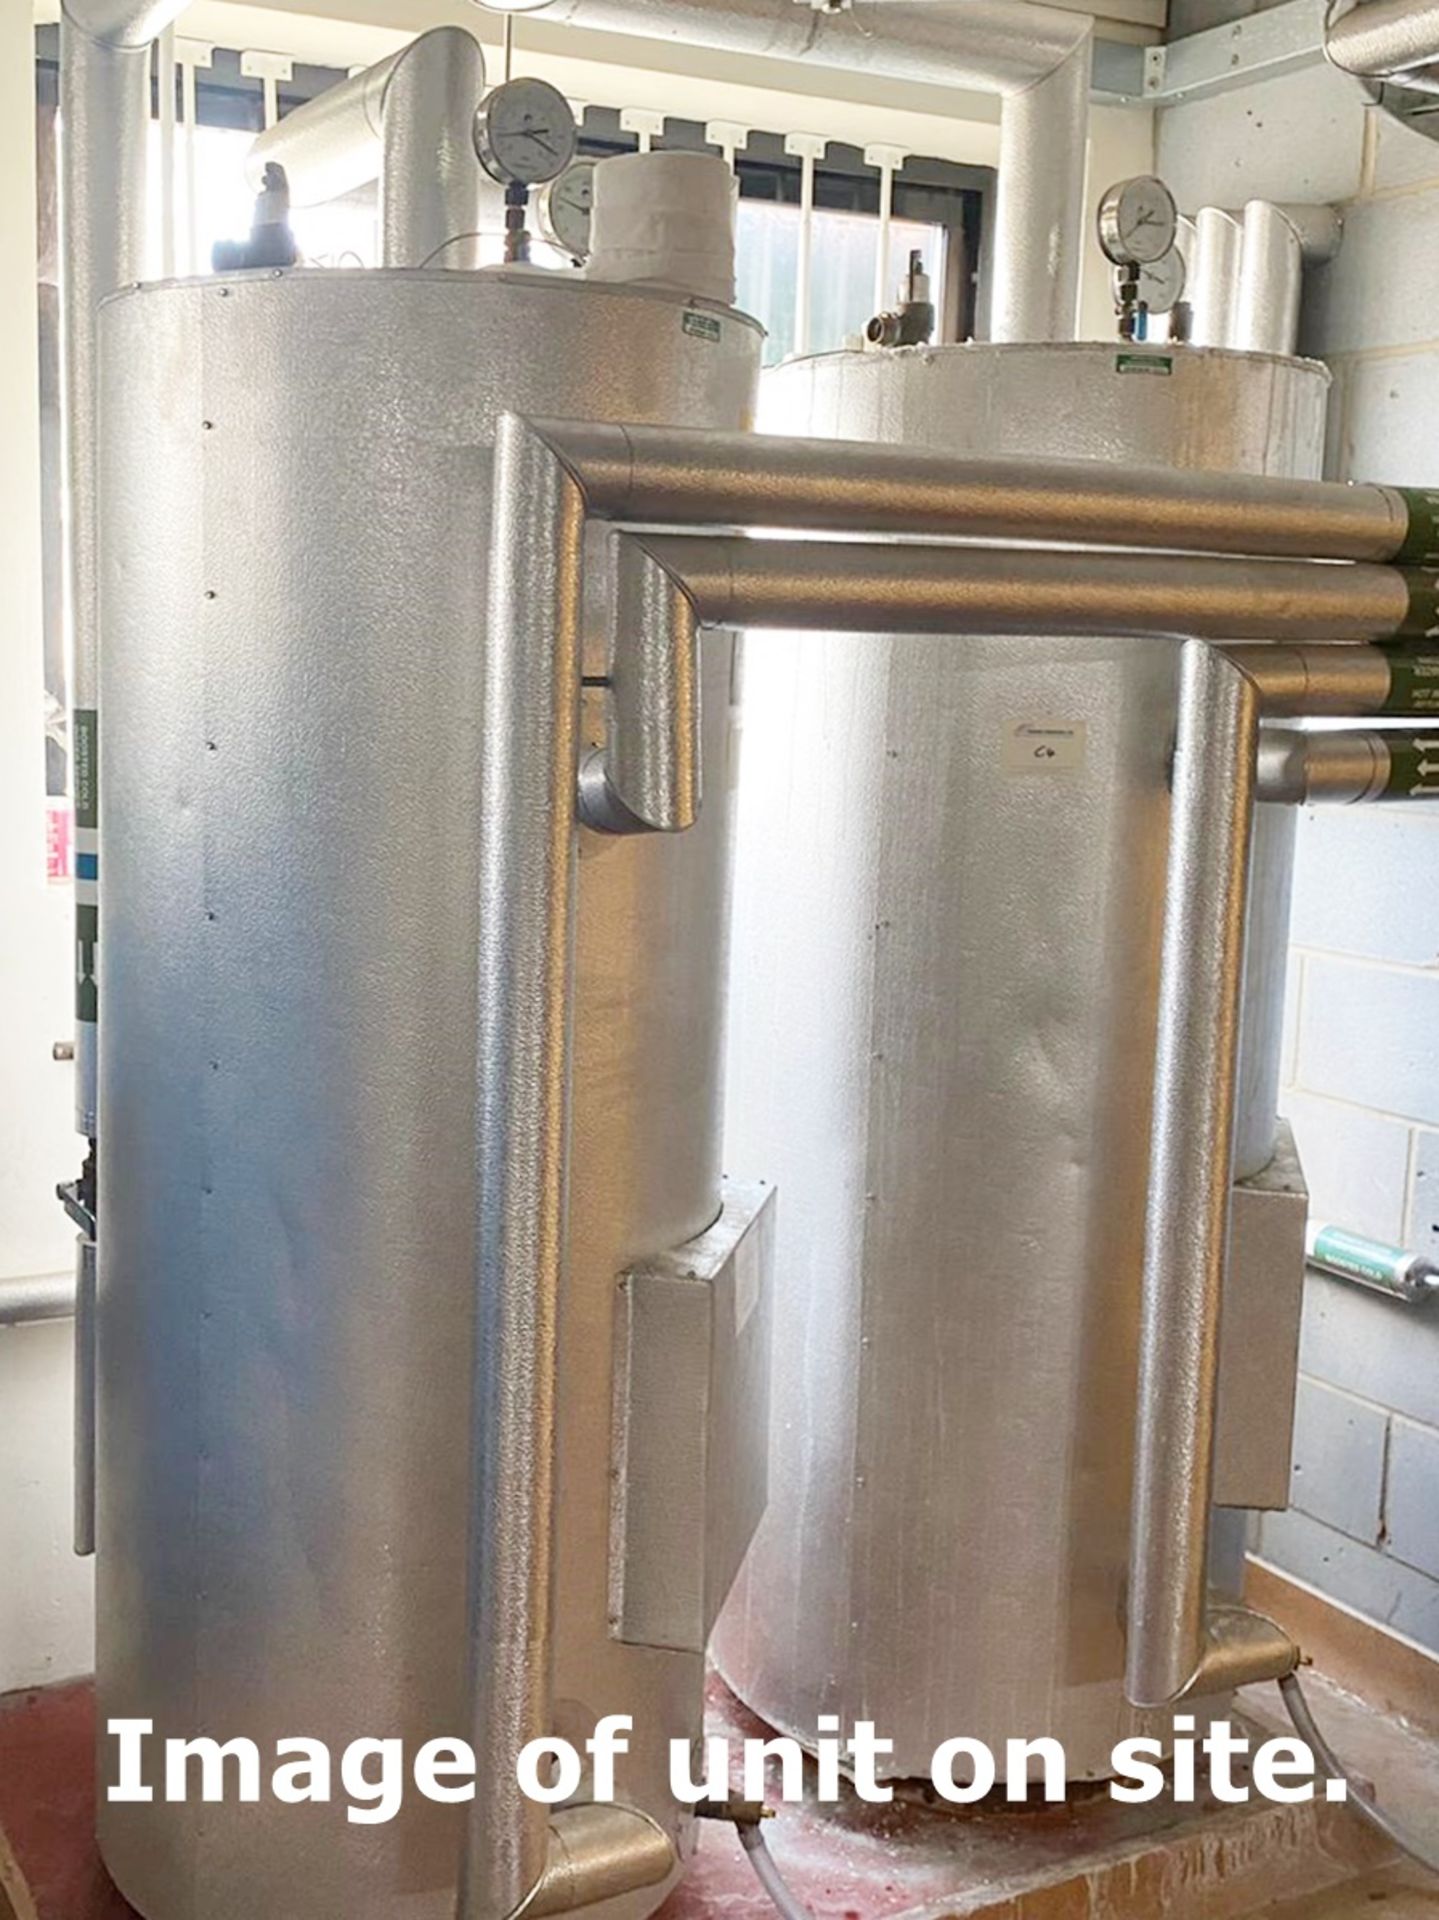 Large Quantity of Thermal Pipe Covering Contents of Two Upright Cabinets - Cabinets Not Included - - Image 9 of 10